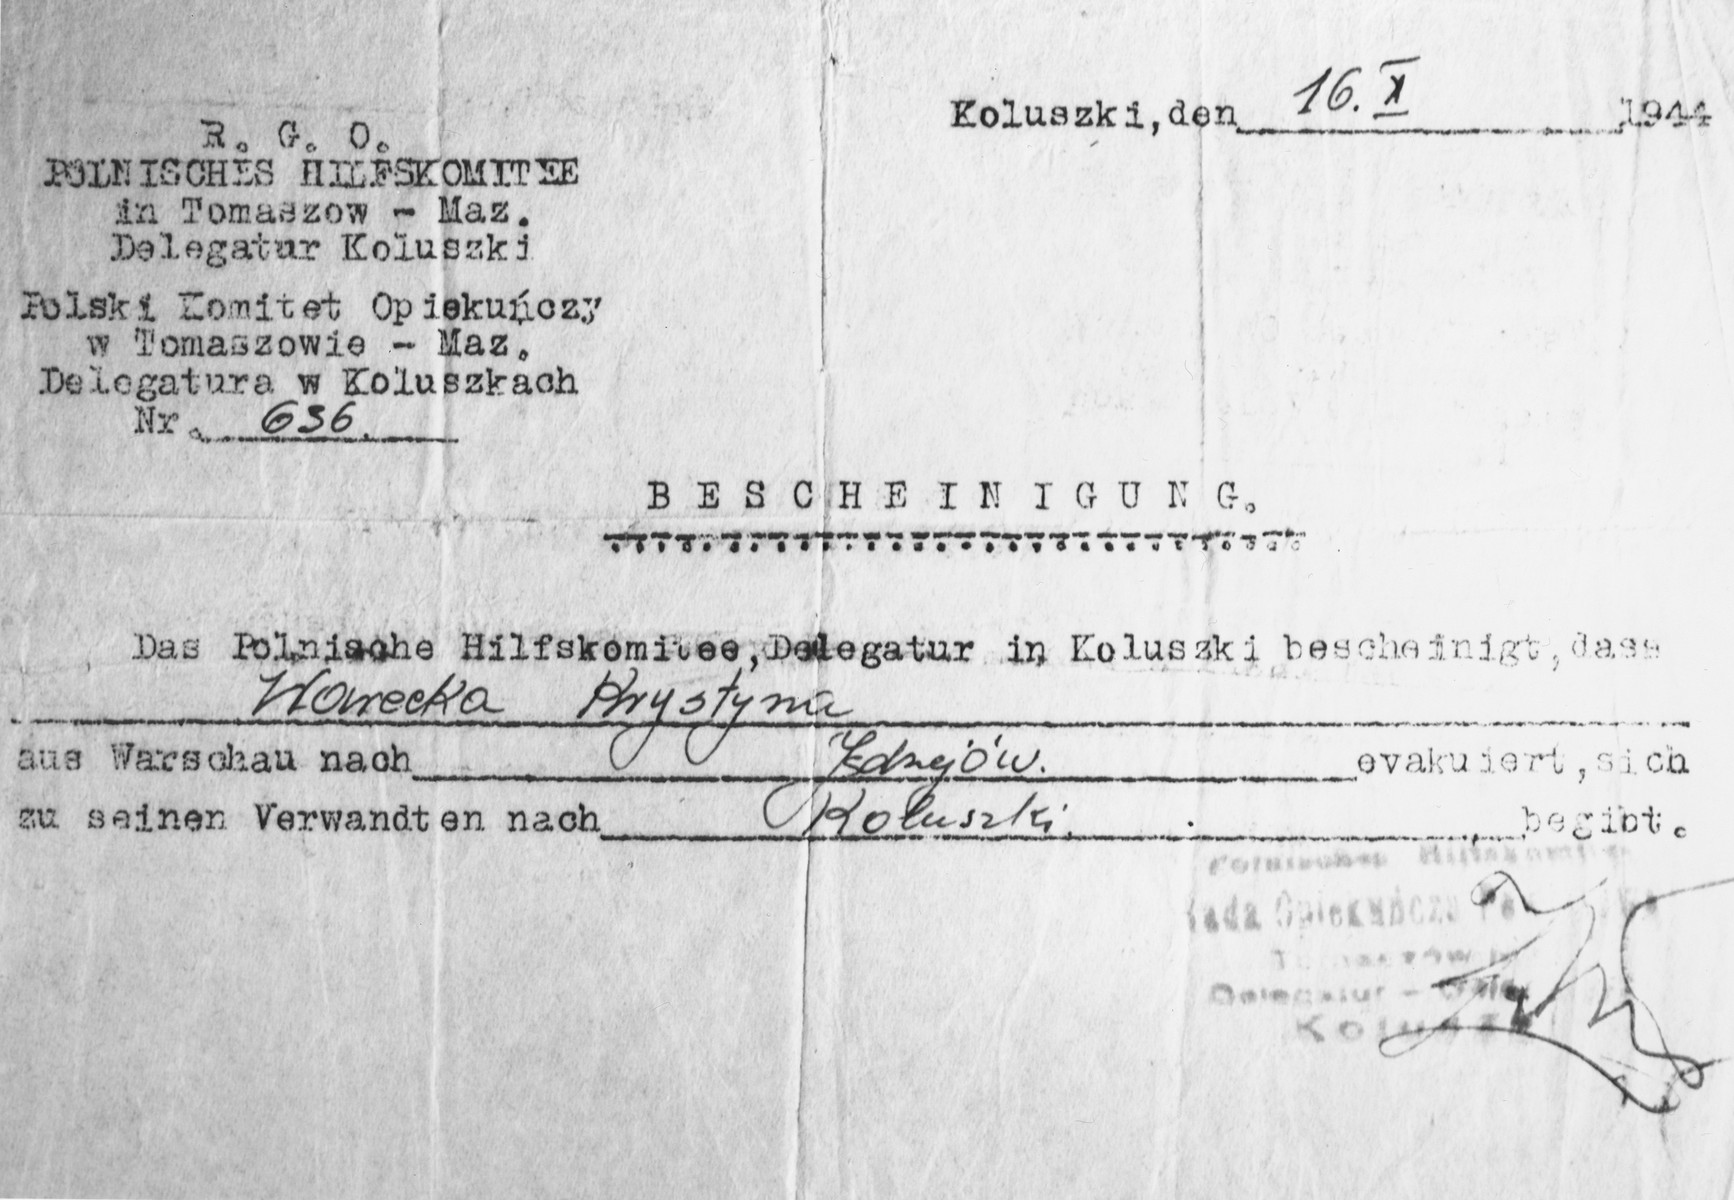 A certificate issued to Krystyna Warecka (Bianka Rozenman, the donor) by the Polish Welfare Committee in Koluszki, stating that the bearer was evacuated from Warsaw to Jedrzejow, but is allowed to join her family in Koluszki.  

The certificate was issued on October 16, 1944, during the mass evacuation of the population from Warsaw, following the Polish uprising in August 1944.